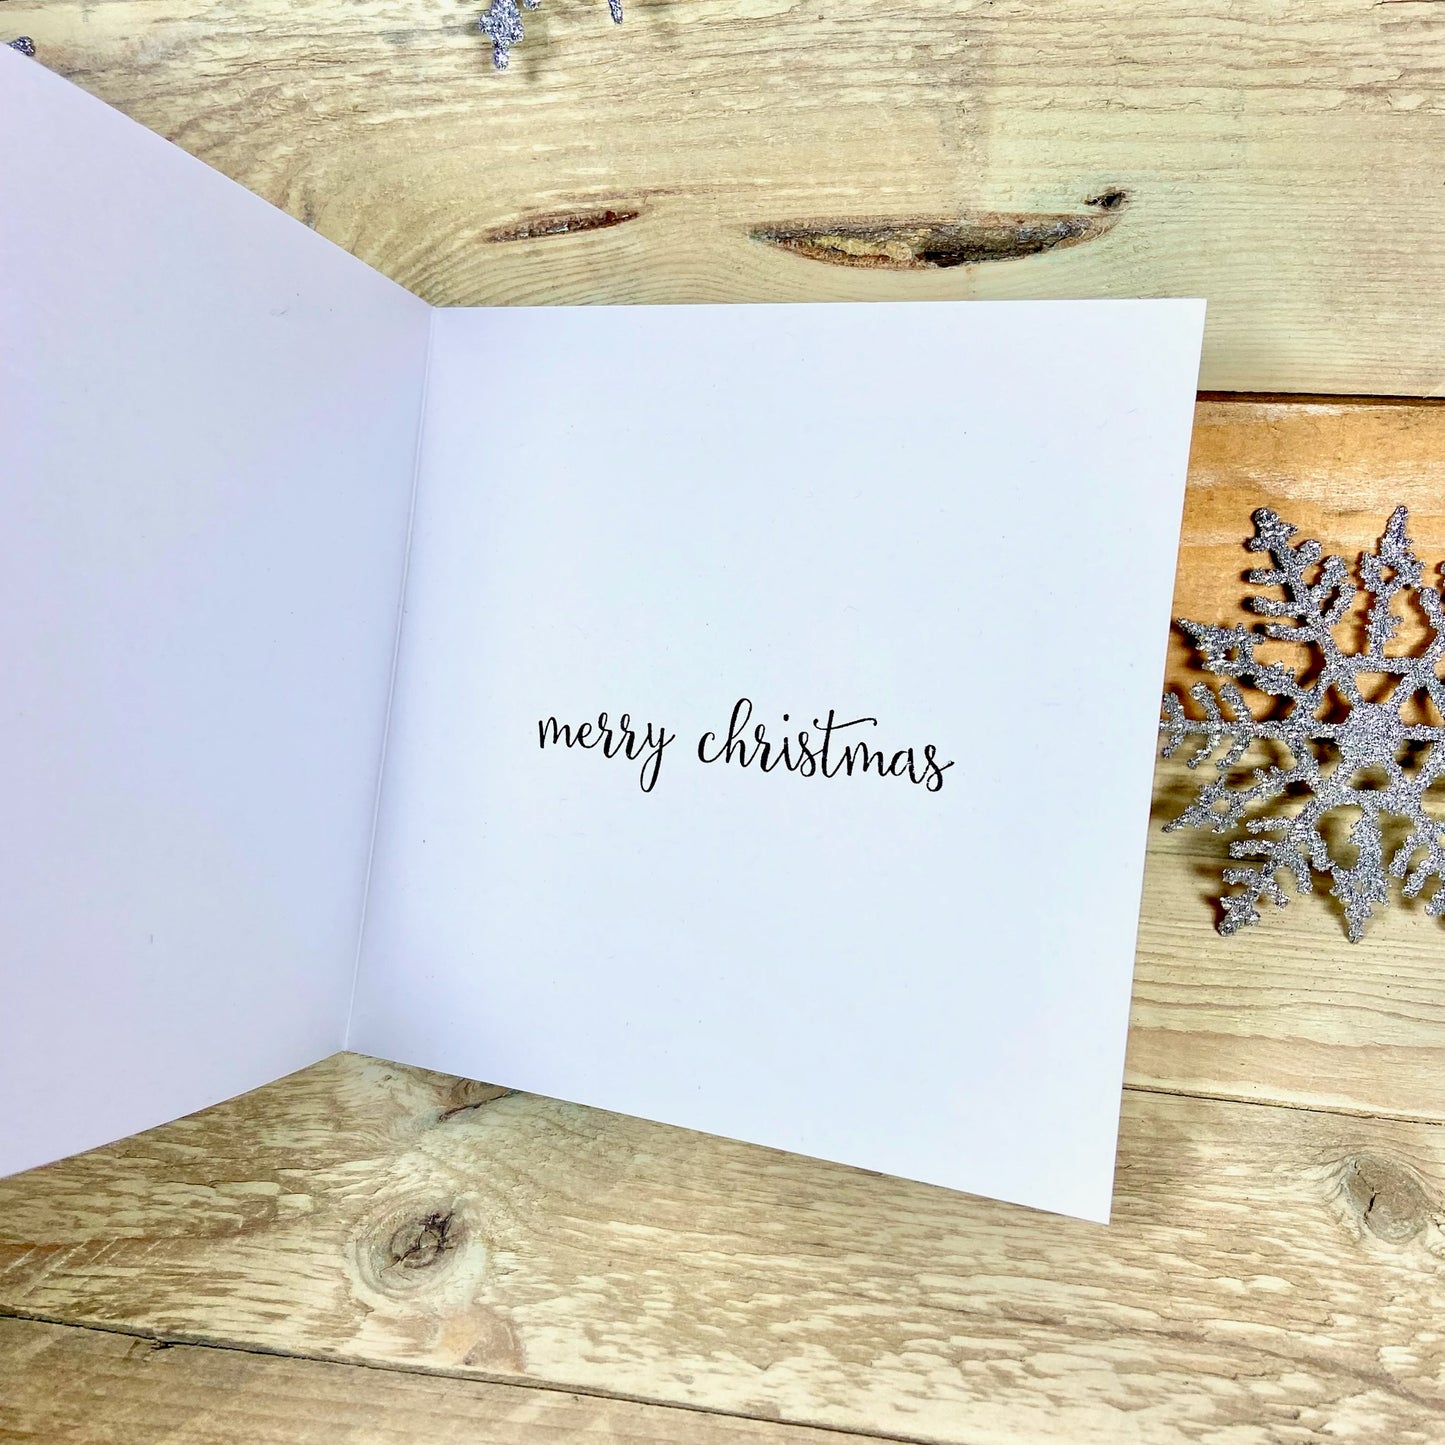 The Last Post Charity Christmas Card